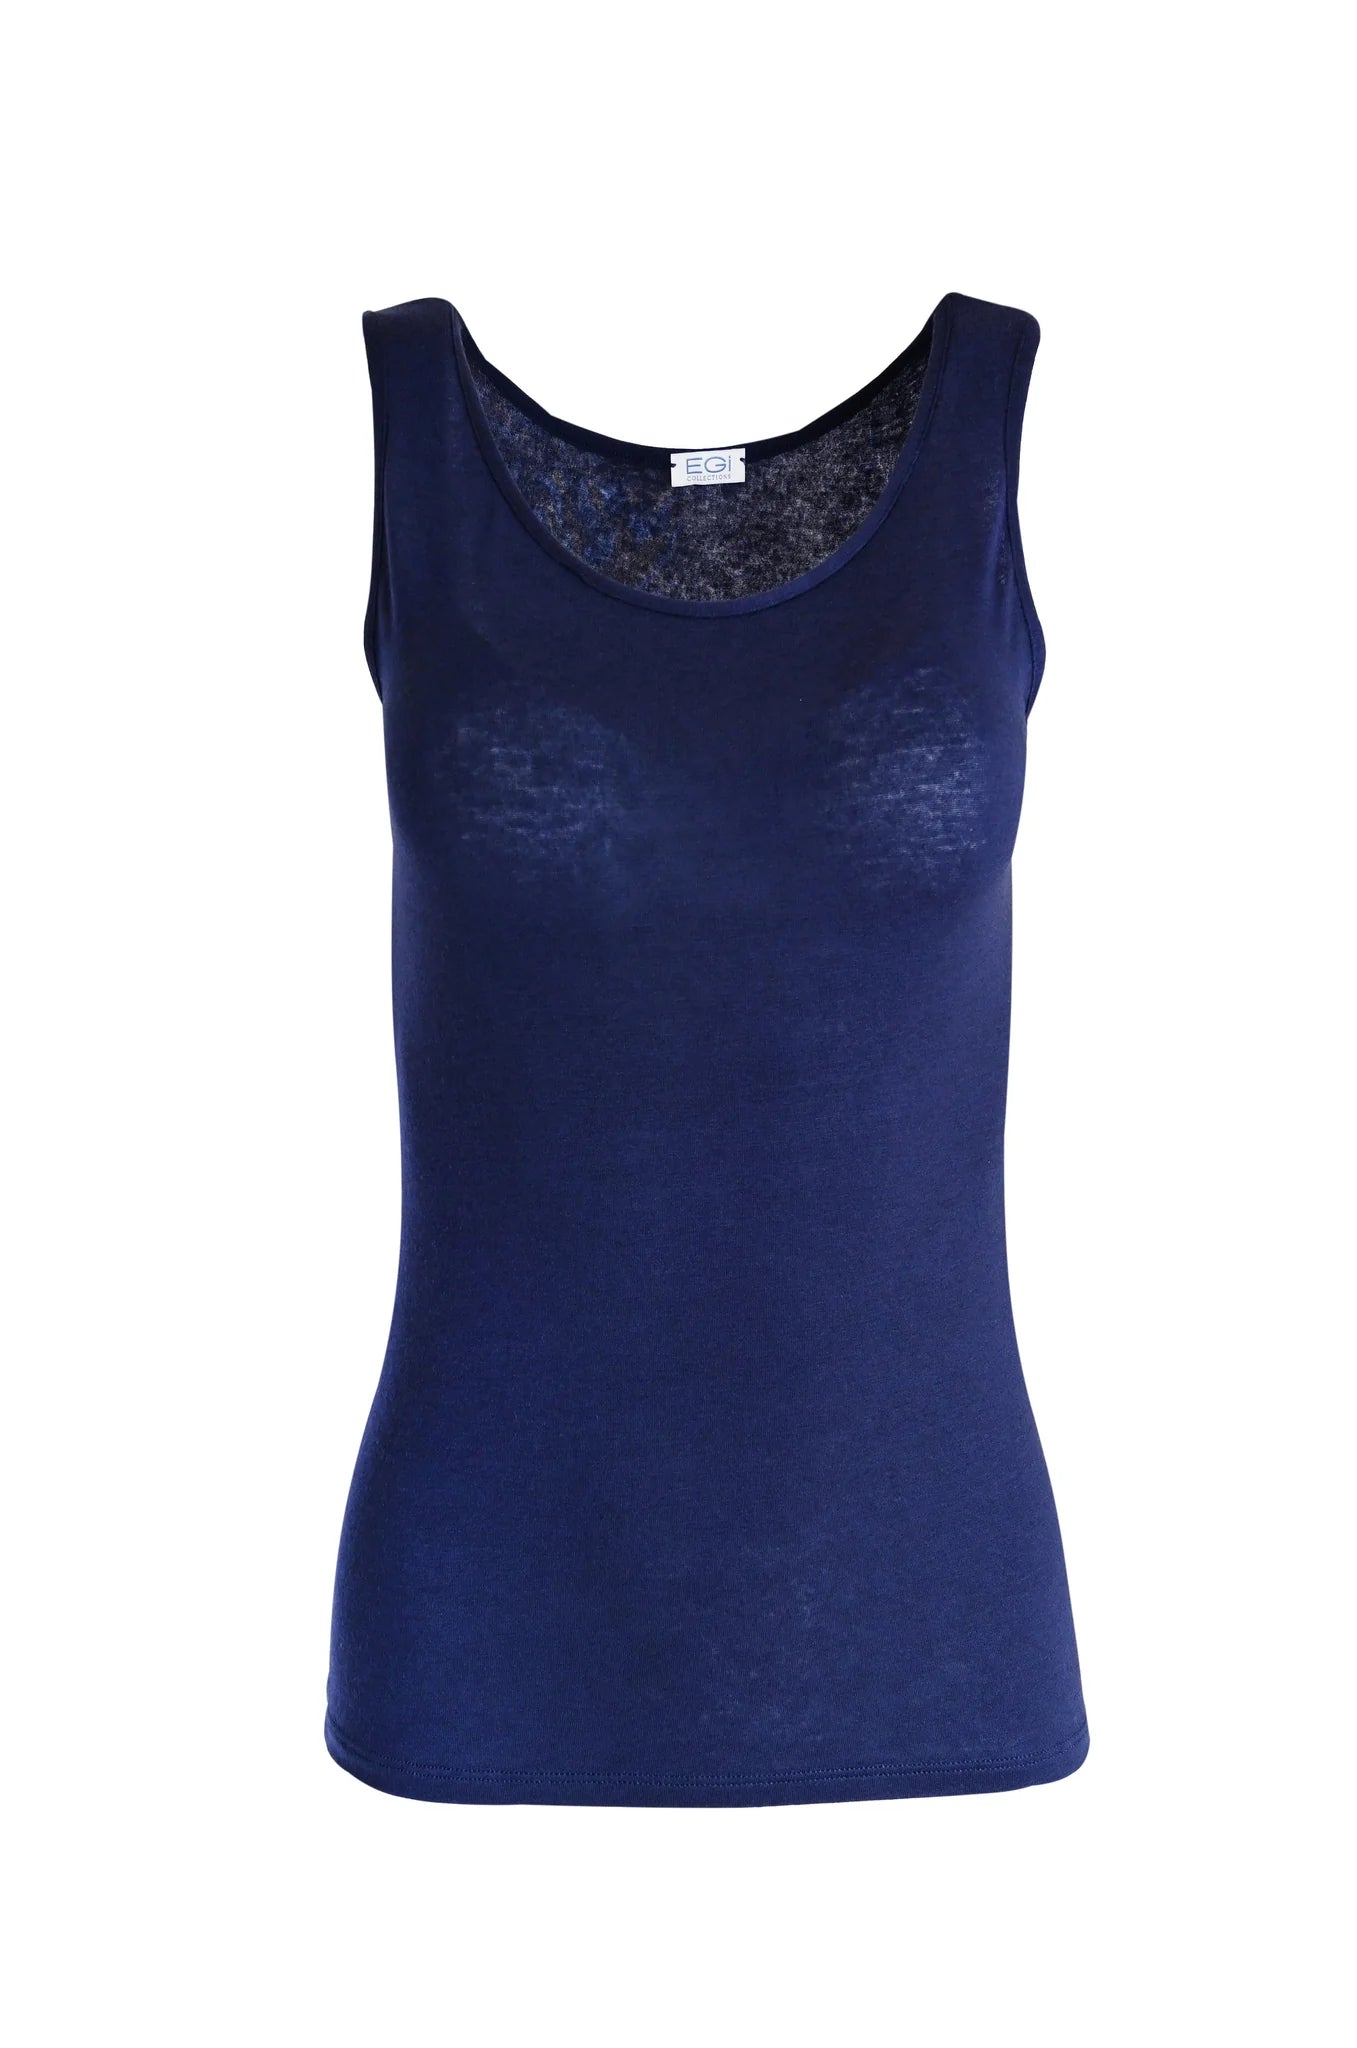 Women's ultralight Modal and Cashmere tank top - Made in Italy - 5219